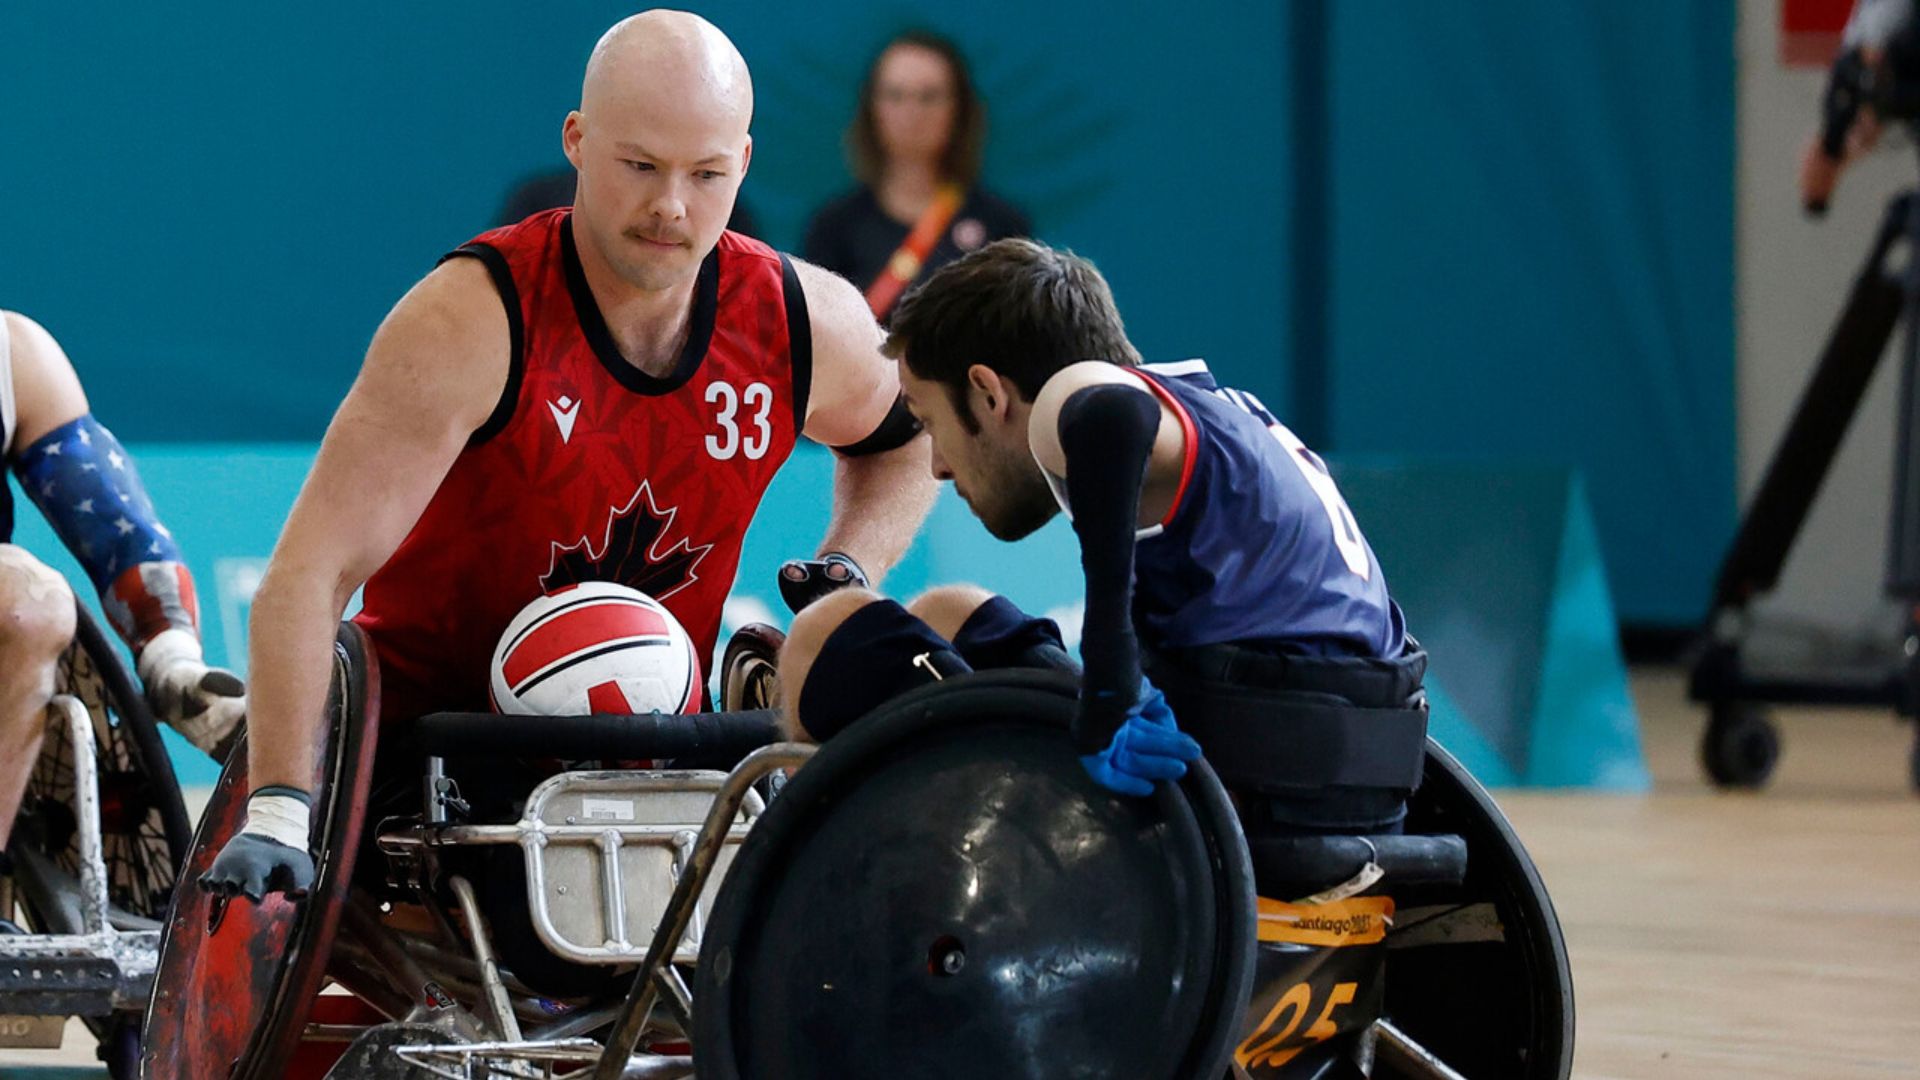 The United States Doesn't Want Any Surprises, Wins Gold in Wheelchair Rugby